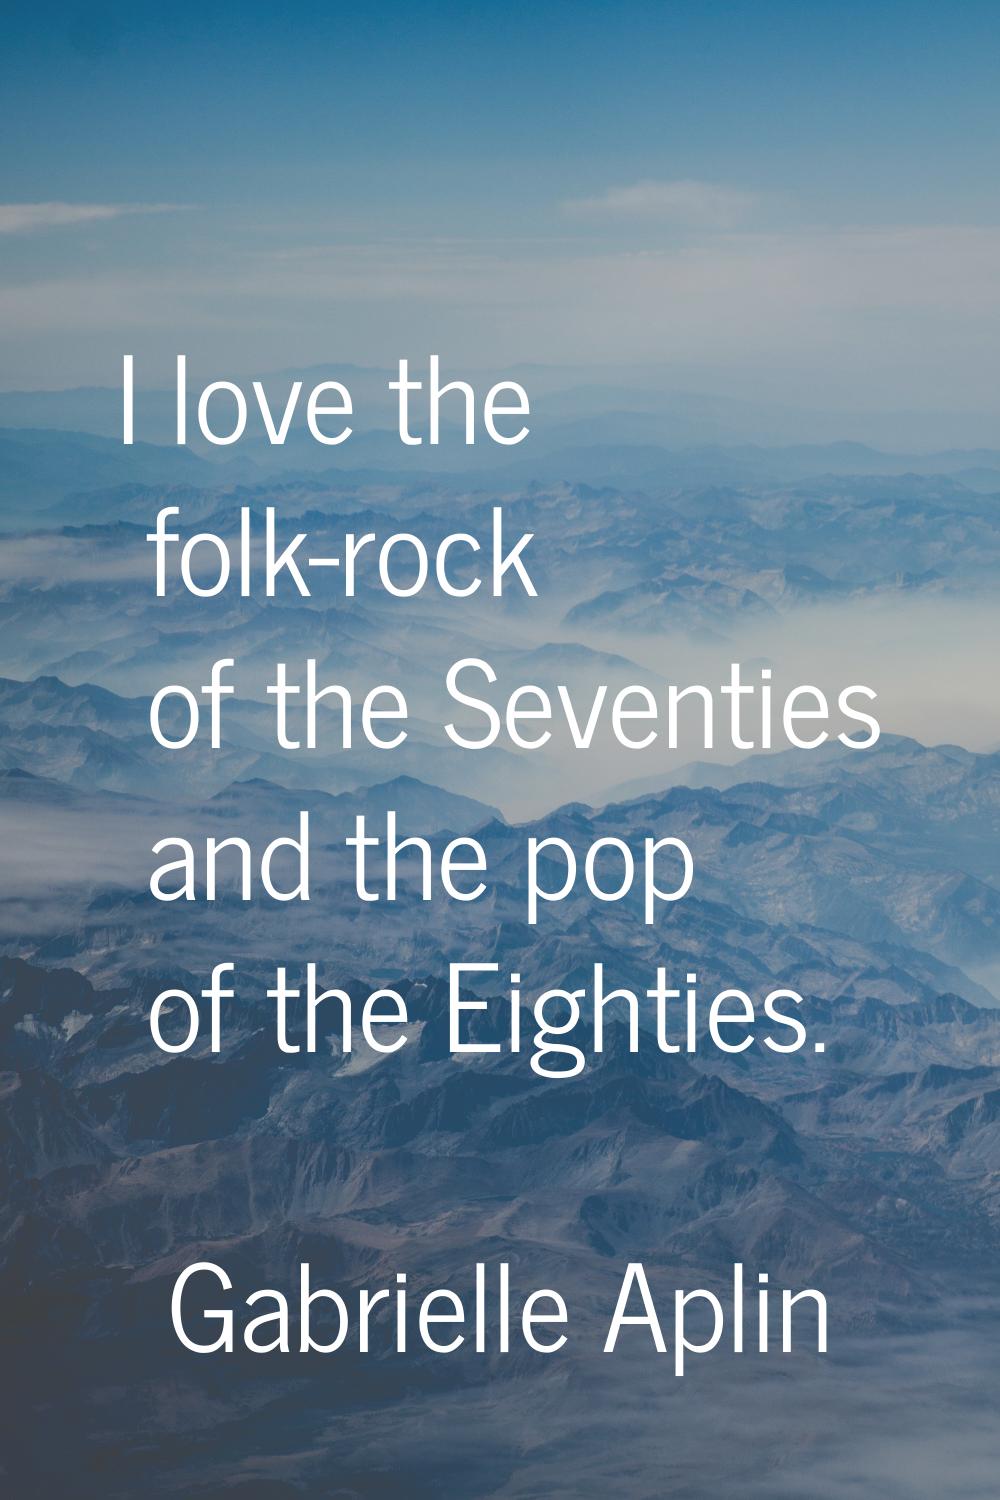 I love the folk-rock of the Seventies and the pop of the Eighties.